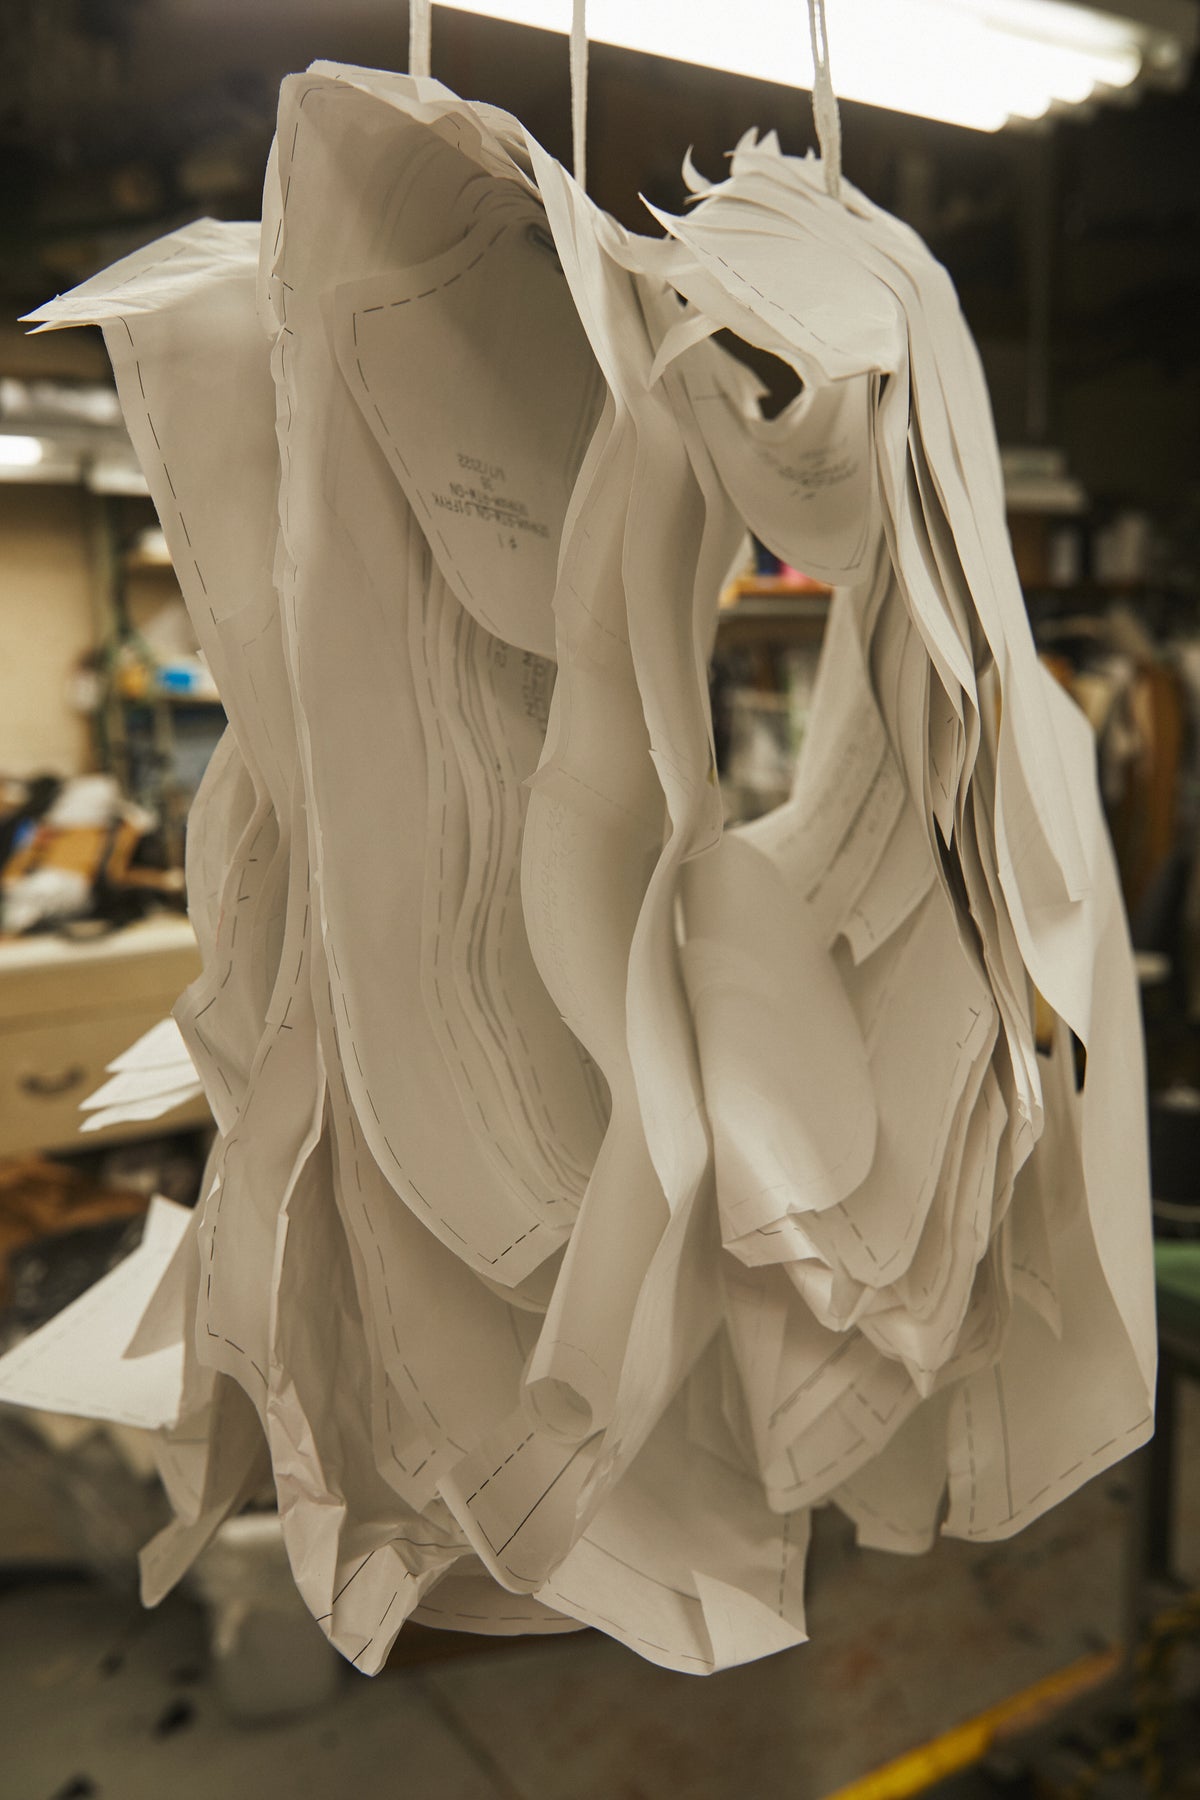 Image of paper pattern pieces on a hanger.